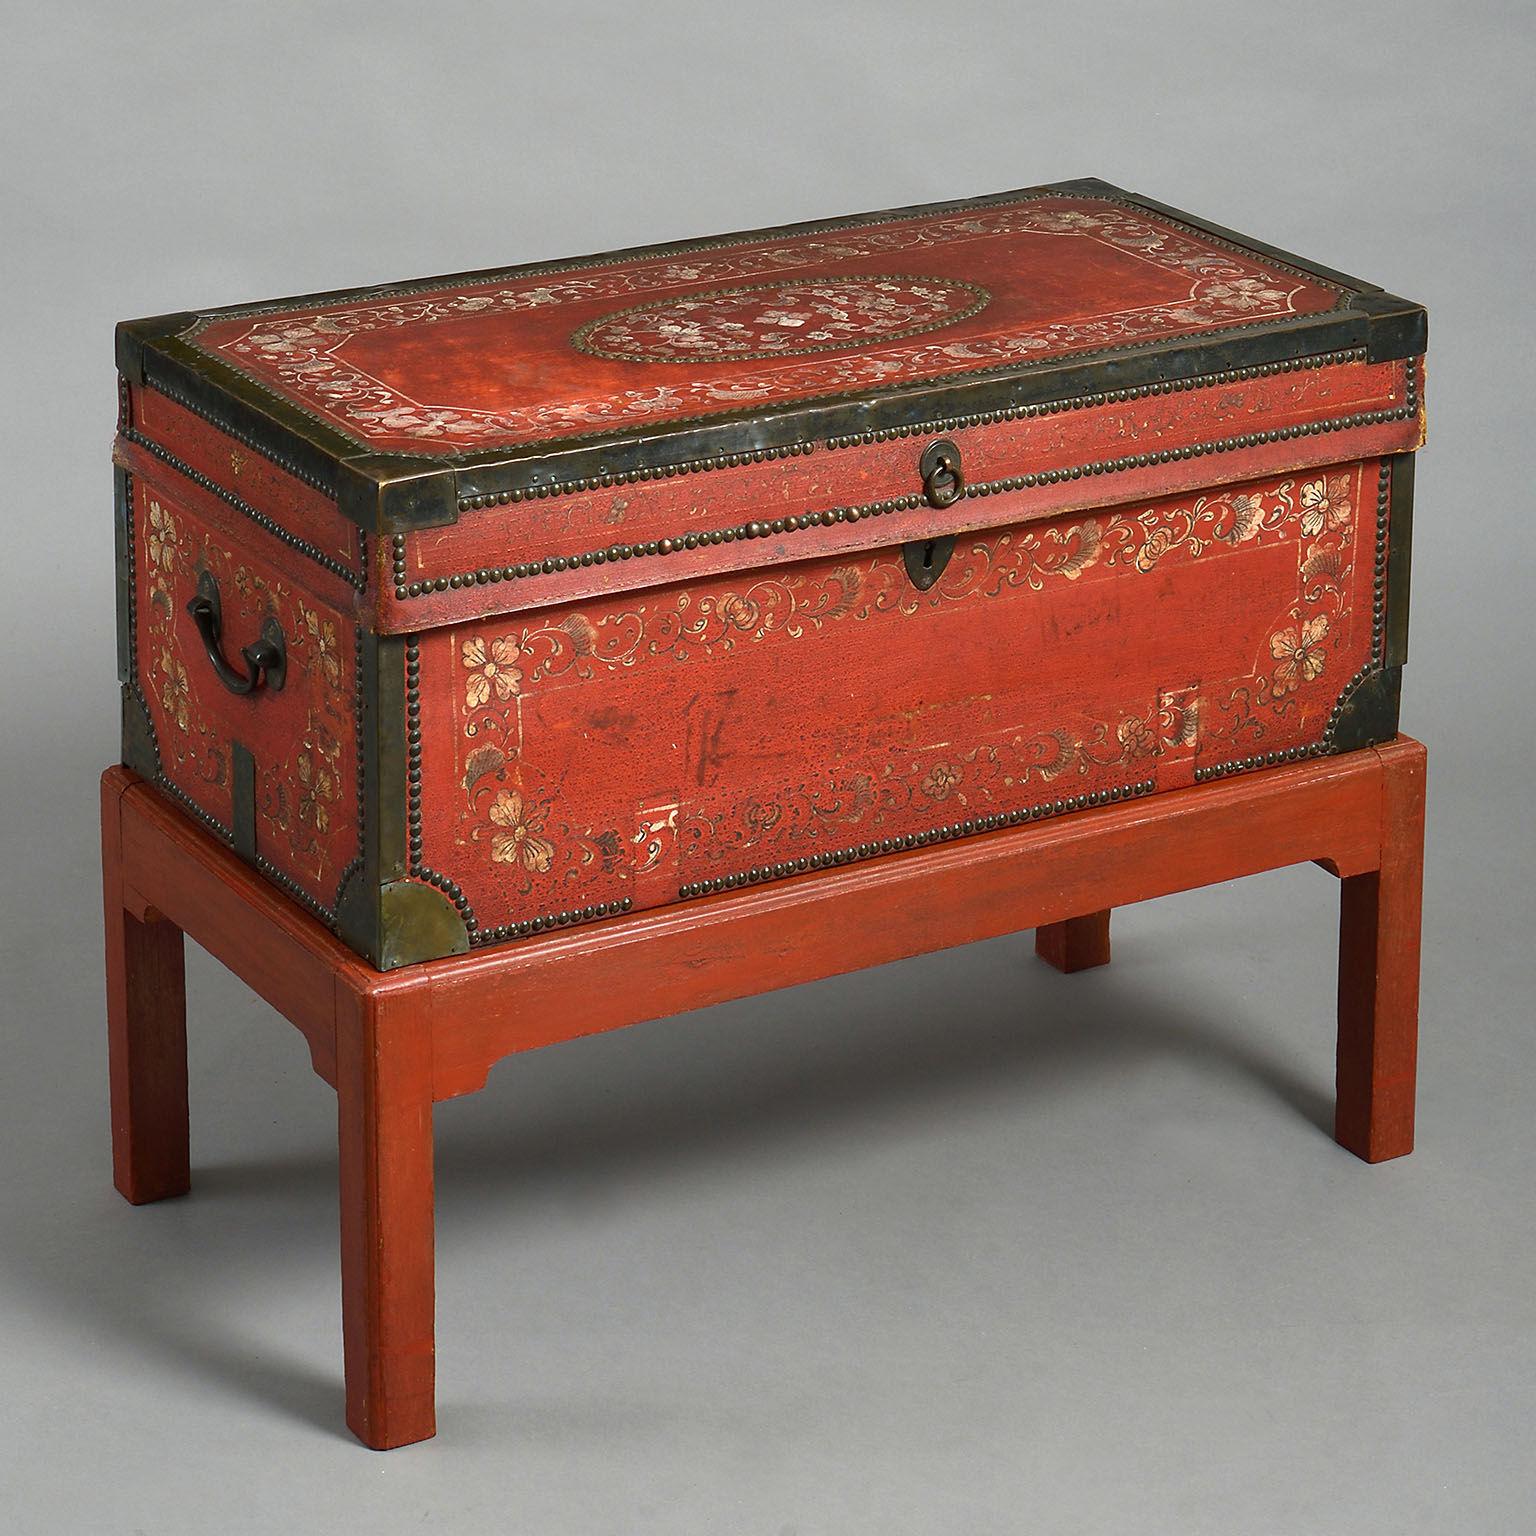 18th Century Chinese Export Painted Leather Trunk In Good Condition For Sale In London, GB